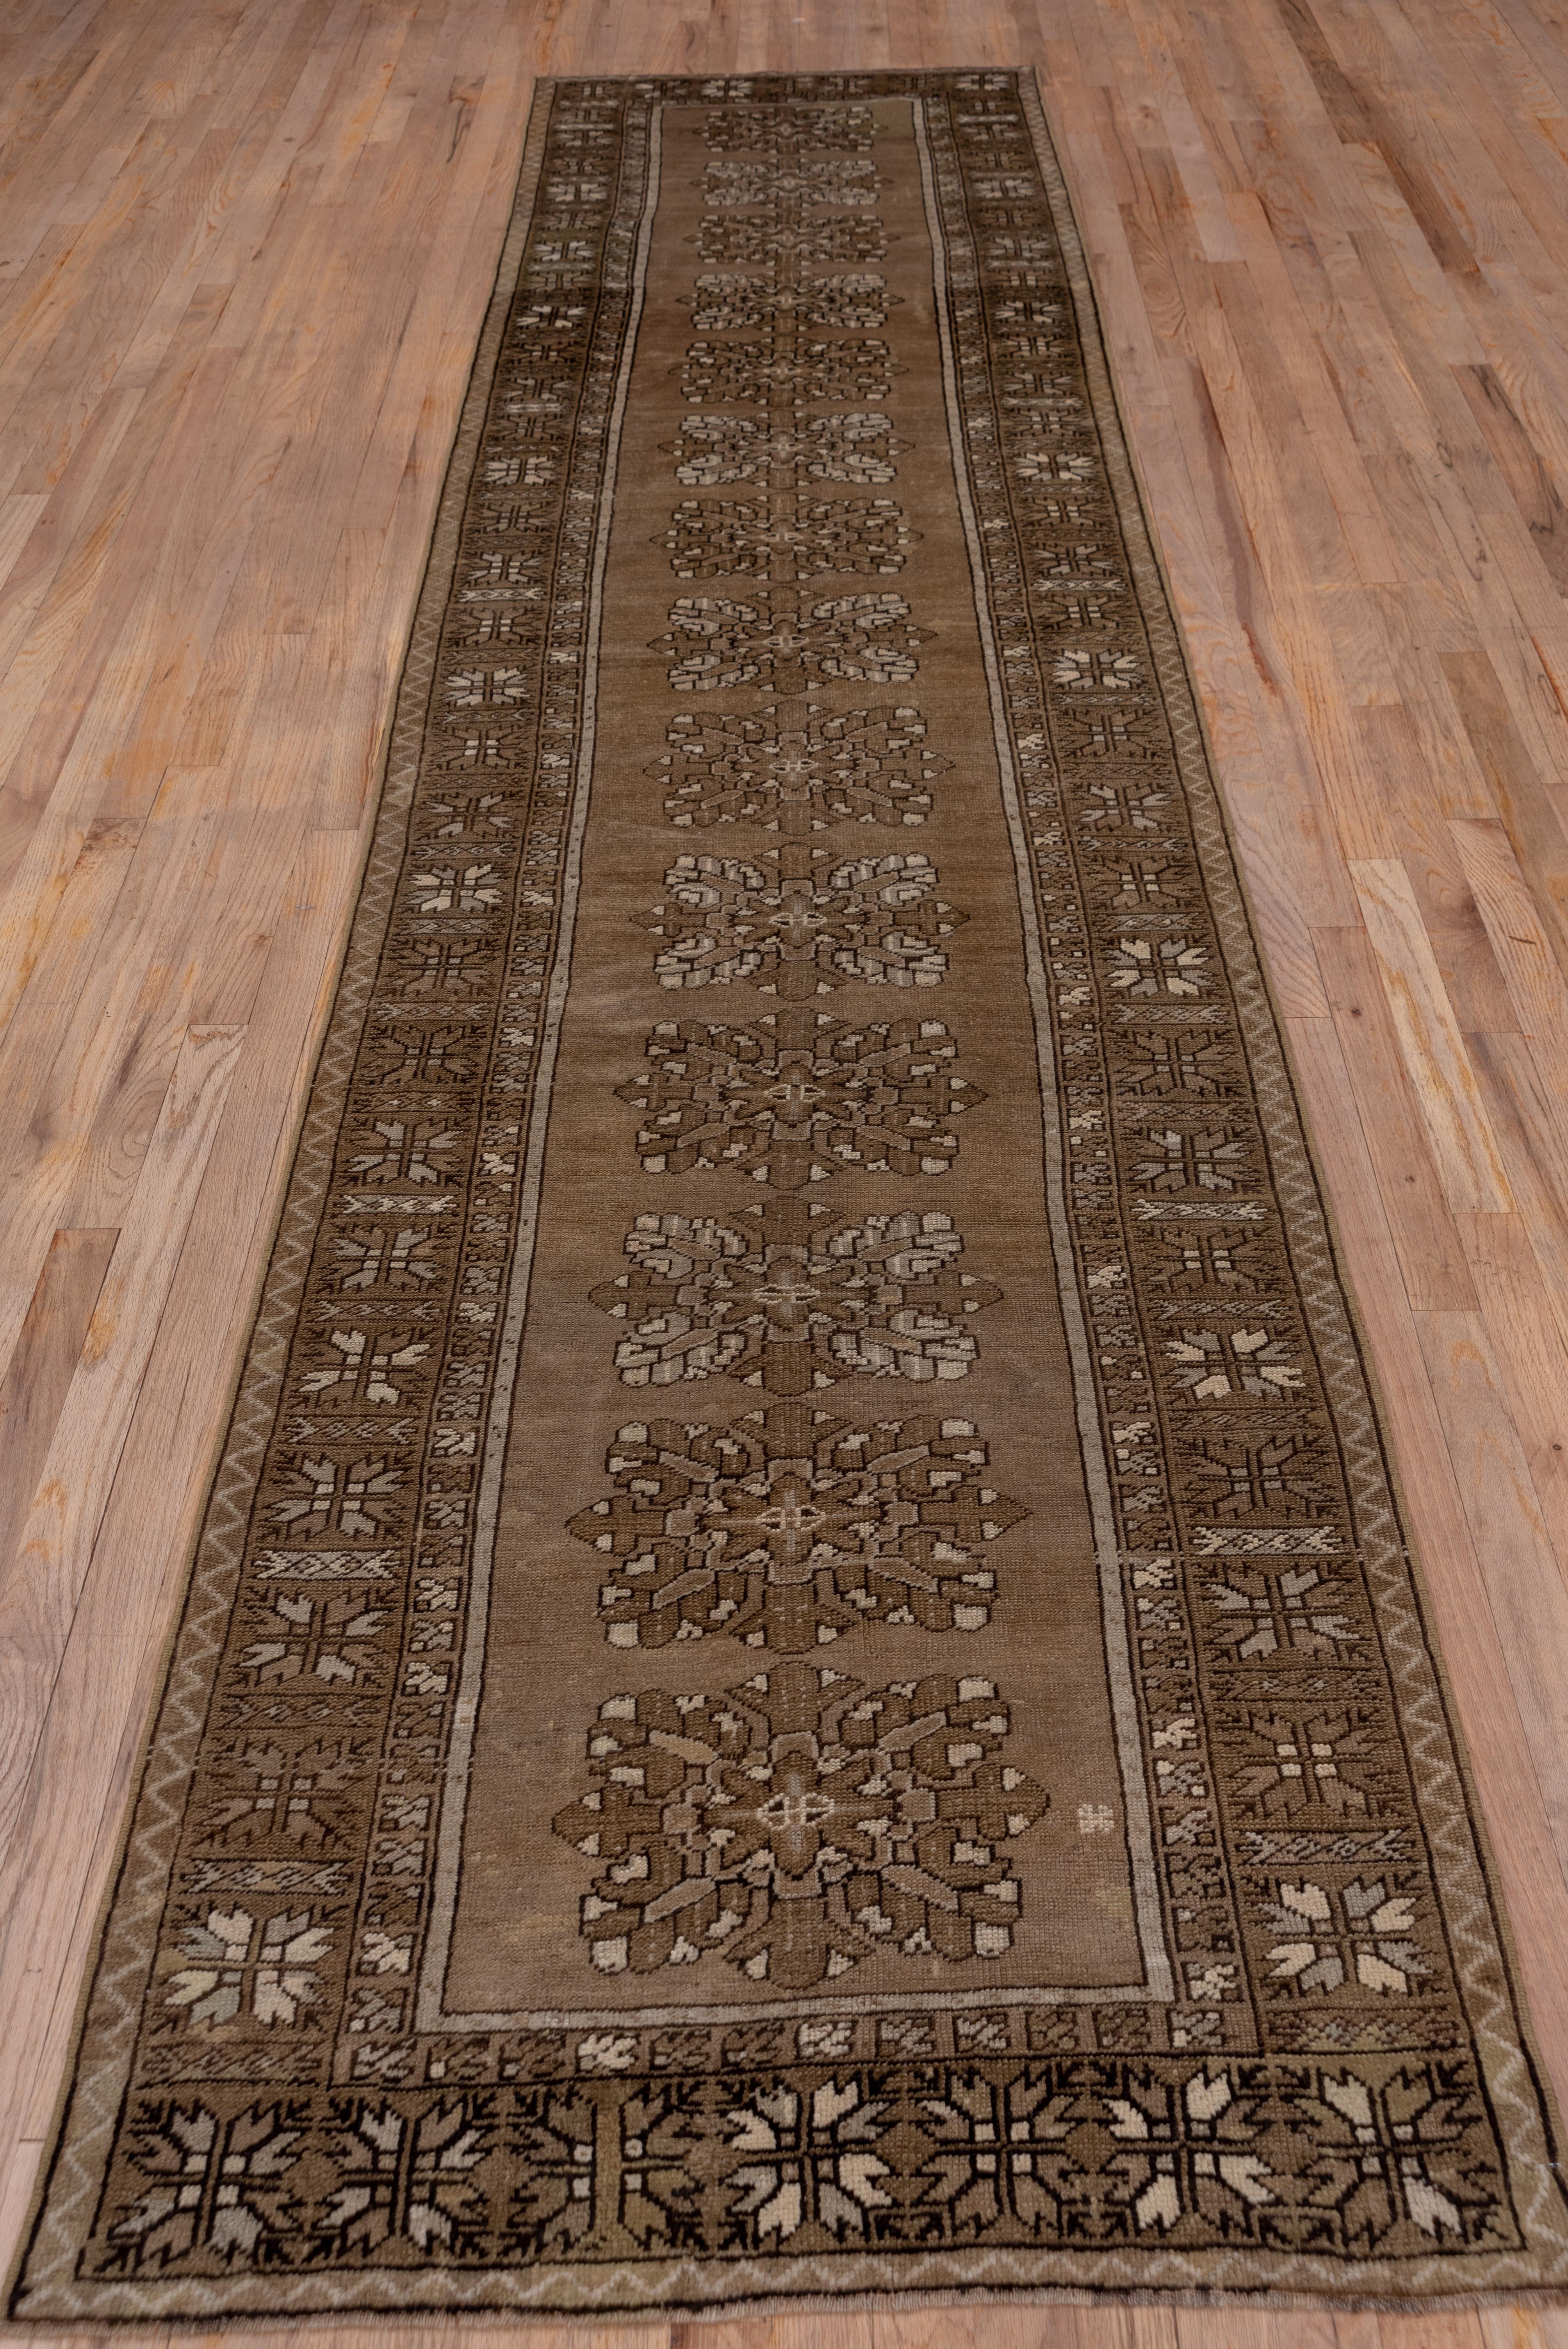 The camel-tone field displays a column of floating layered octofoil rosettes within a green border of four bud square star modules characteristic of certain central Anatolian Konya rugs. The handle is floppy and pliable.